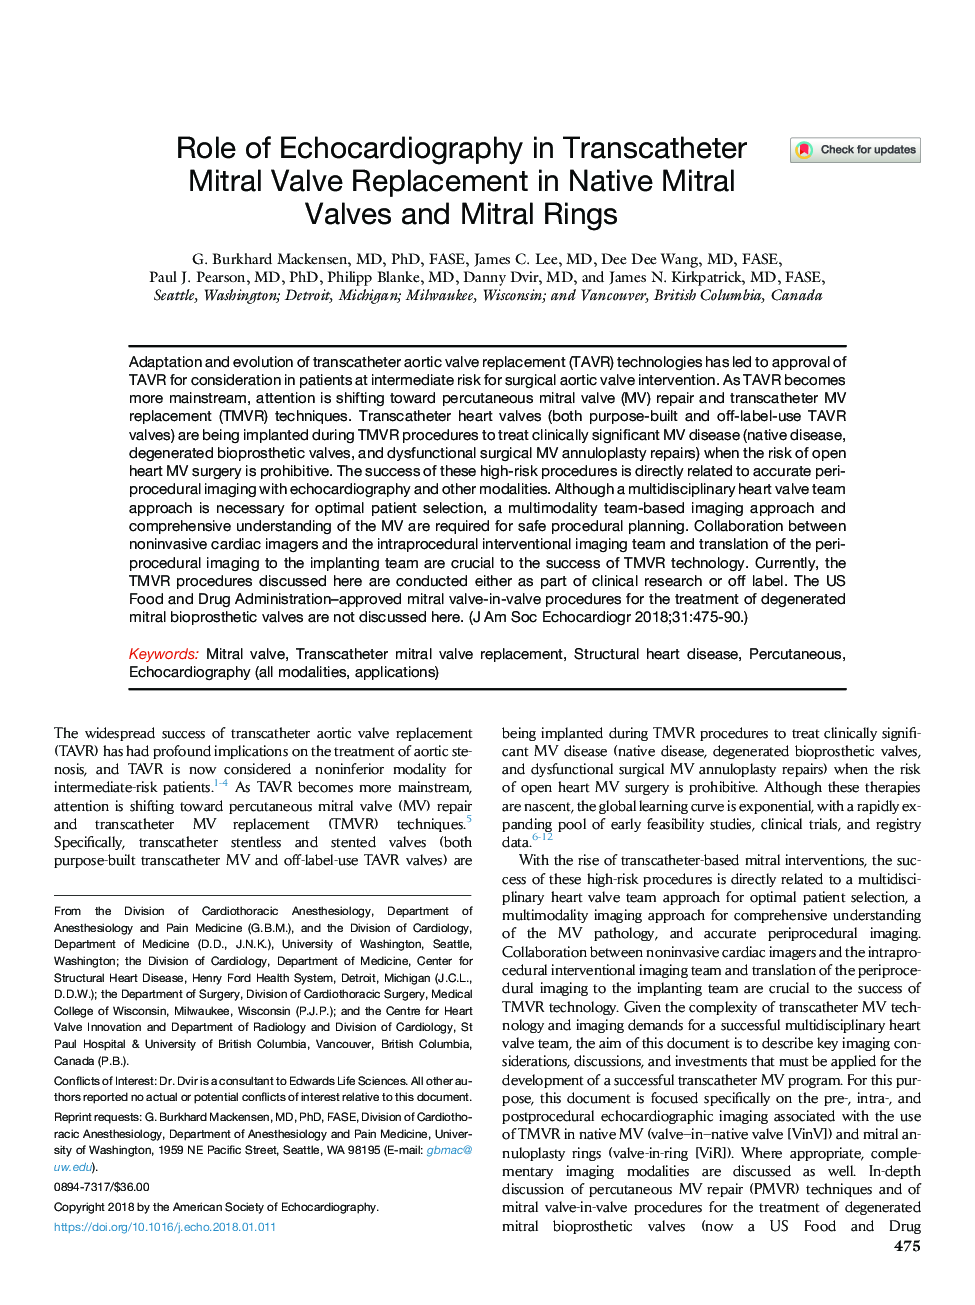 Role of Echocardiography in Transcatheter Mitral Valve Replacement in Native Mitral Valves and Mitral Rings